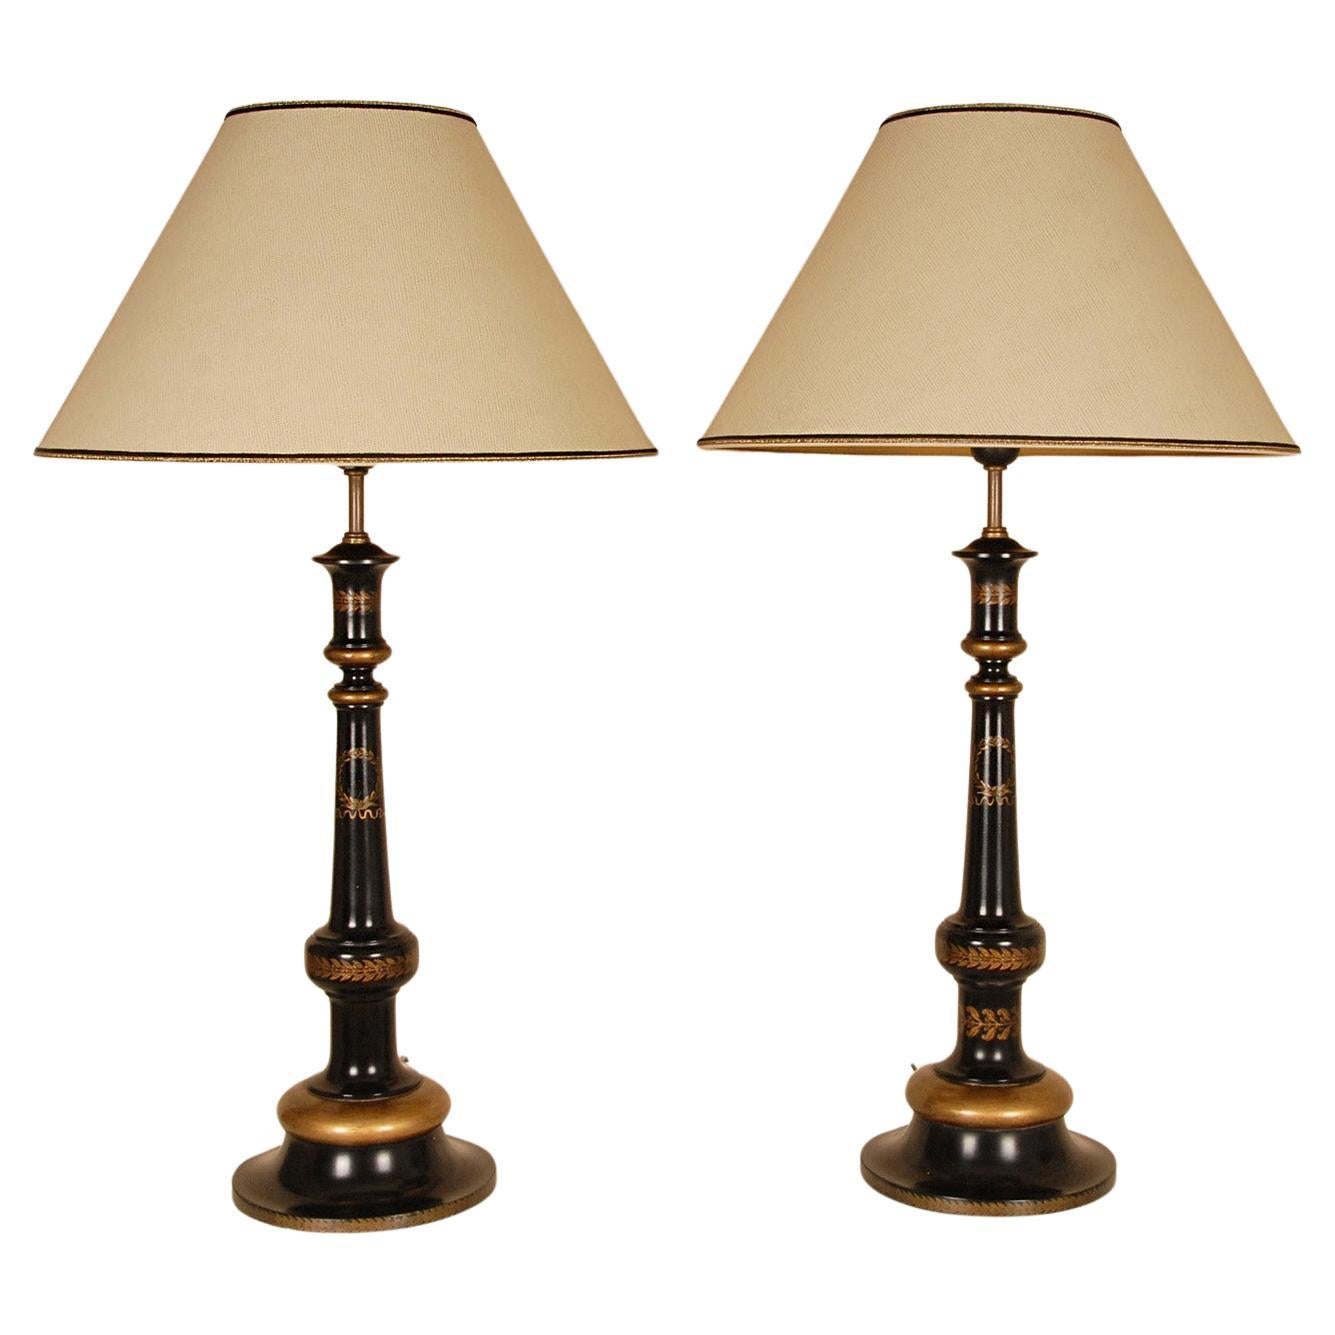 English Traditional Lamps Gold Black Ebonised wood High End Table Lamps